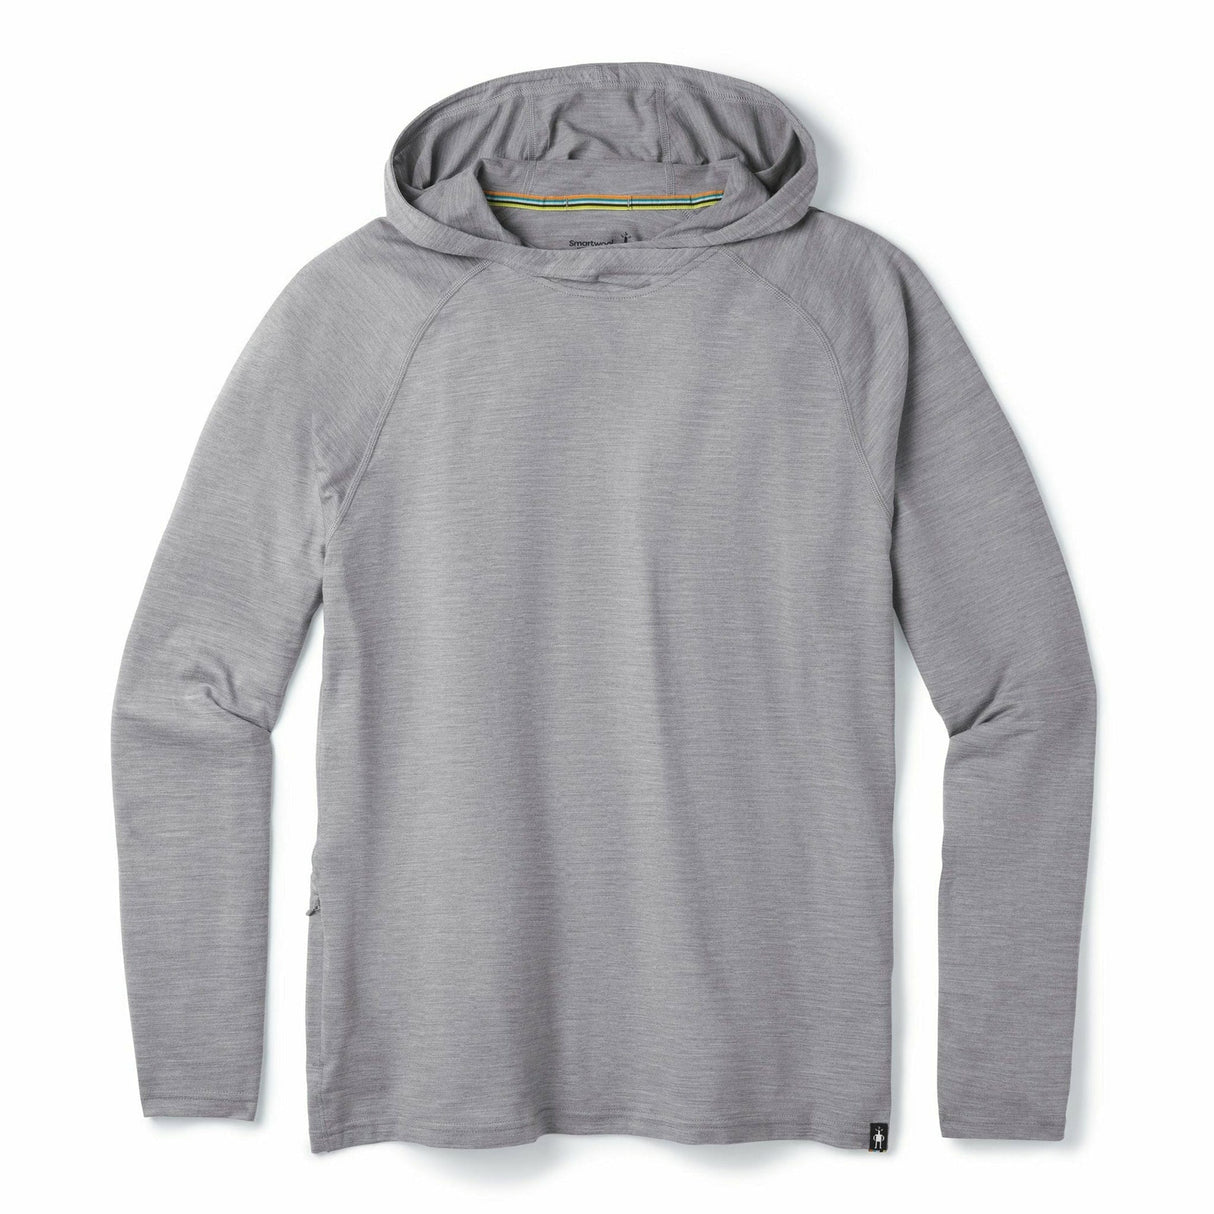 Smartwool Mens Active Hoodie  -  Small / Light Gray Heather